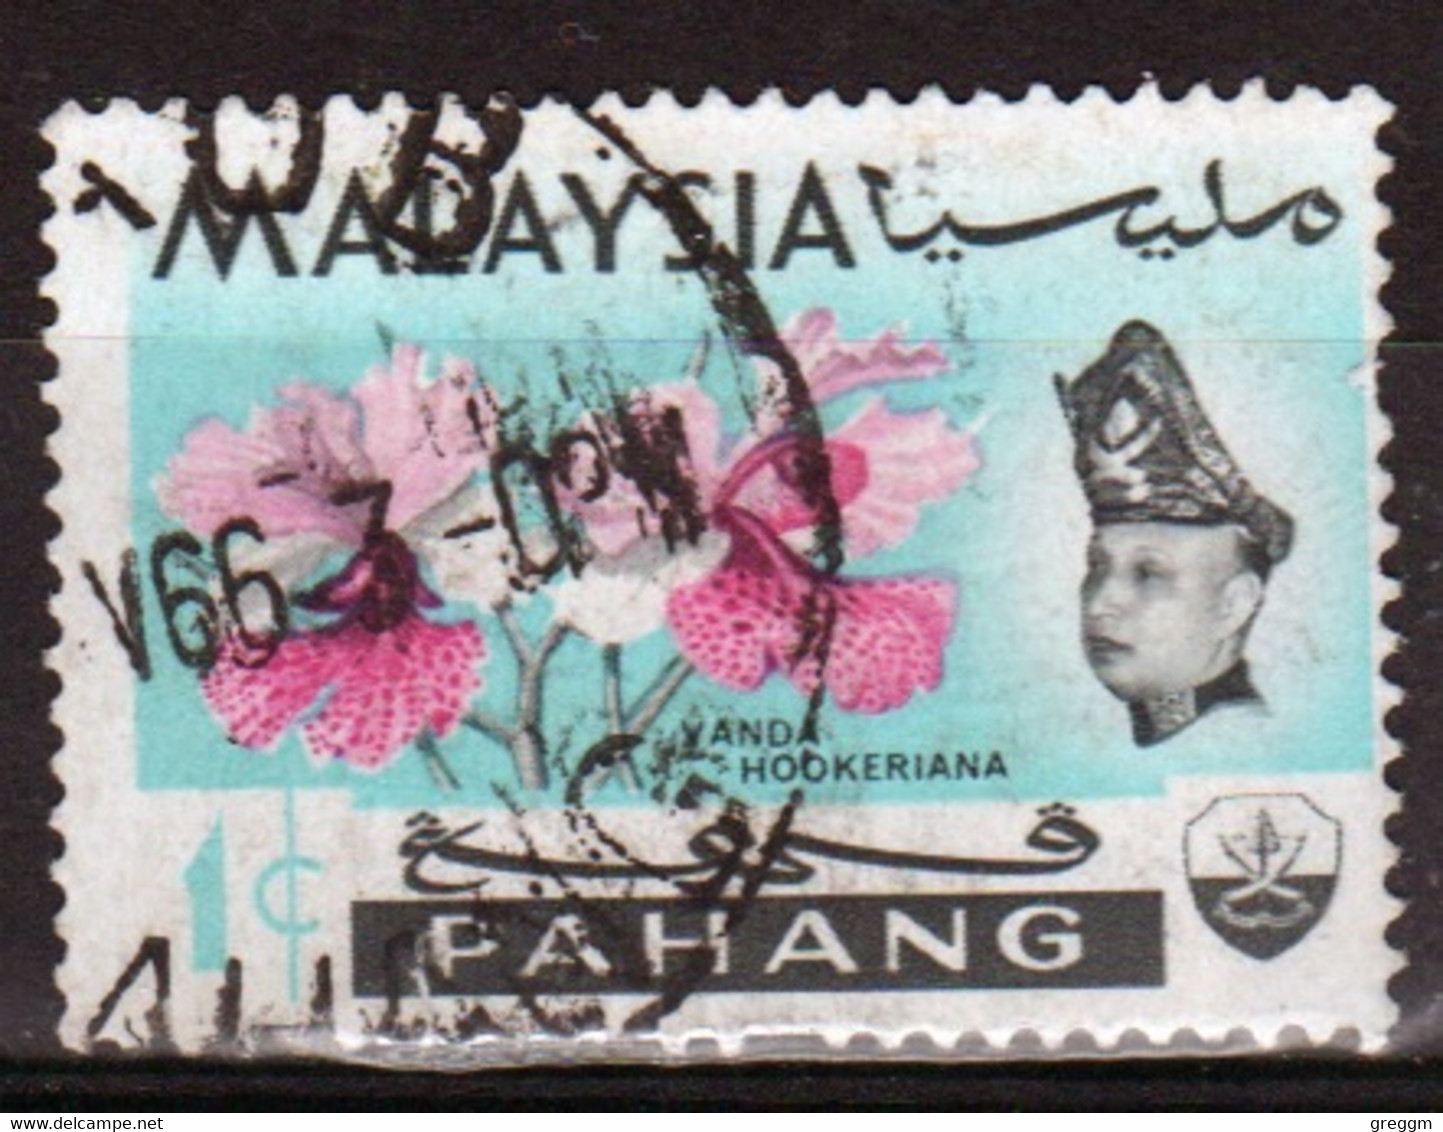 Malaysian State Pahang 1965 Single 1c Definitive Stamp In Fine Used Condition. - Pahang